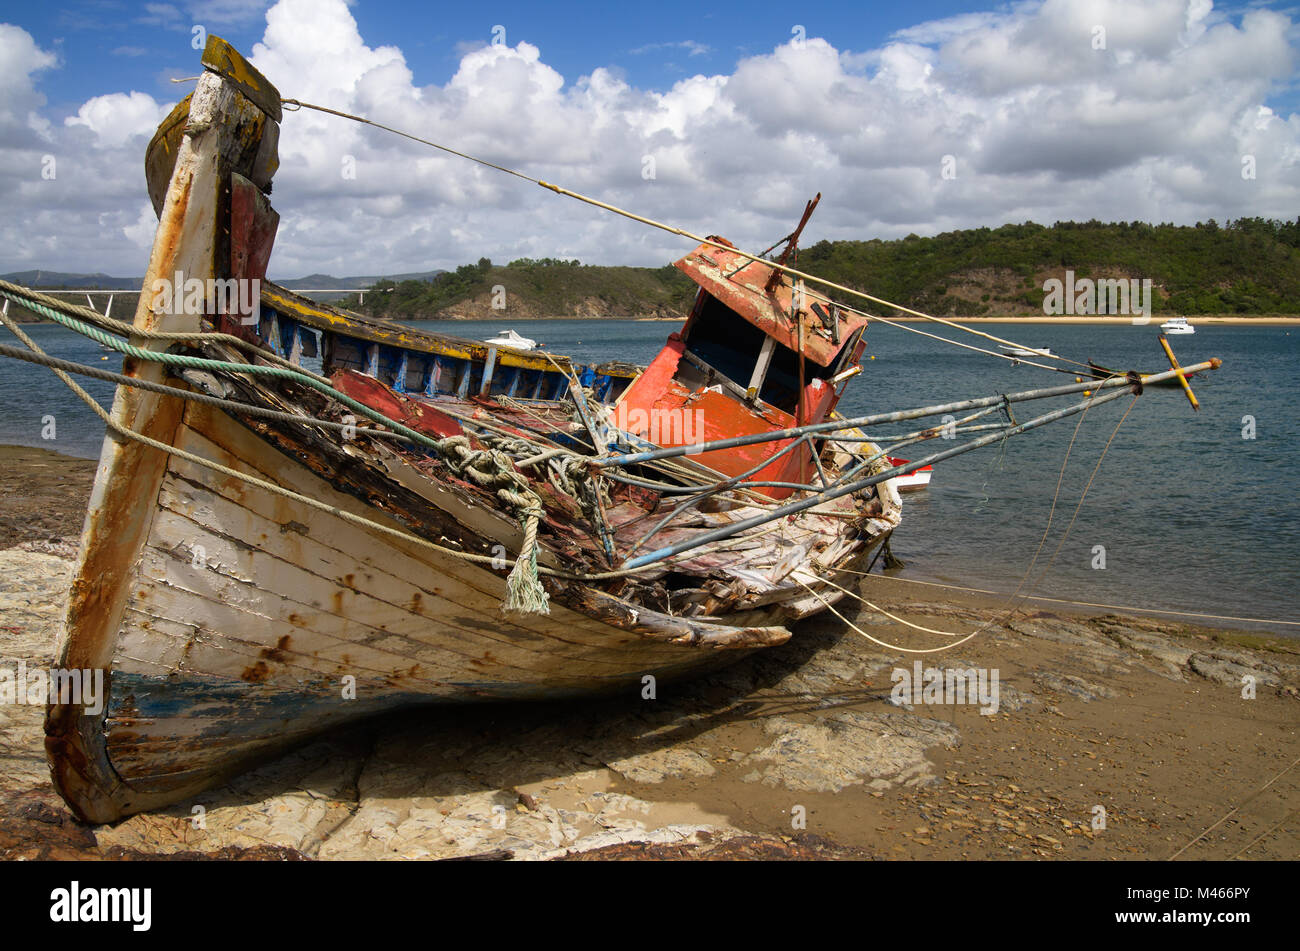 Frontal view of an old fishing boat turned on a side, wrecked and rotting on a rocky bank by the Mira River bank. Bright blue clouded sky. Vila Nova d Stock Photo